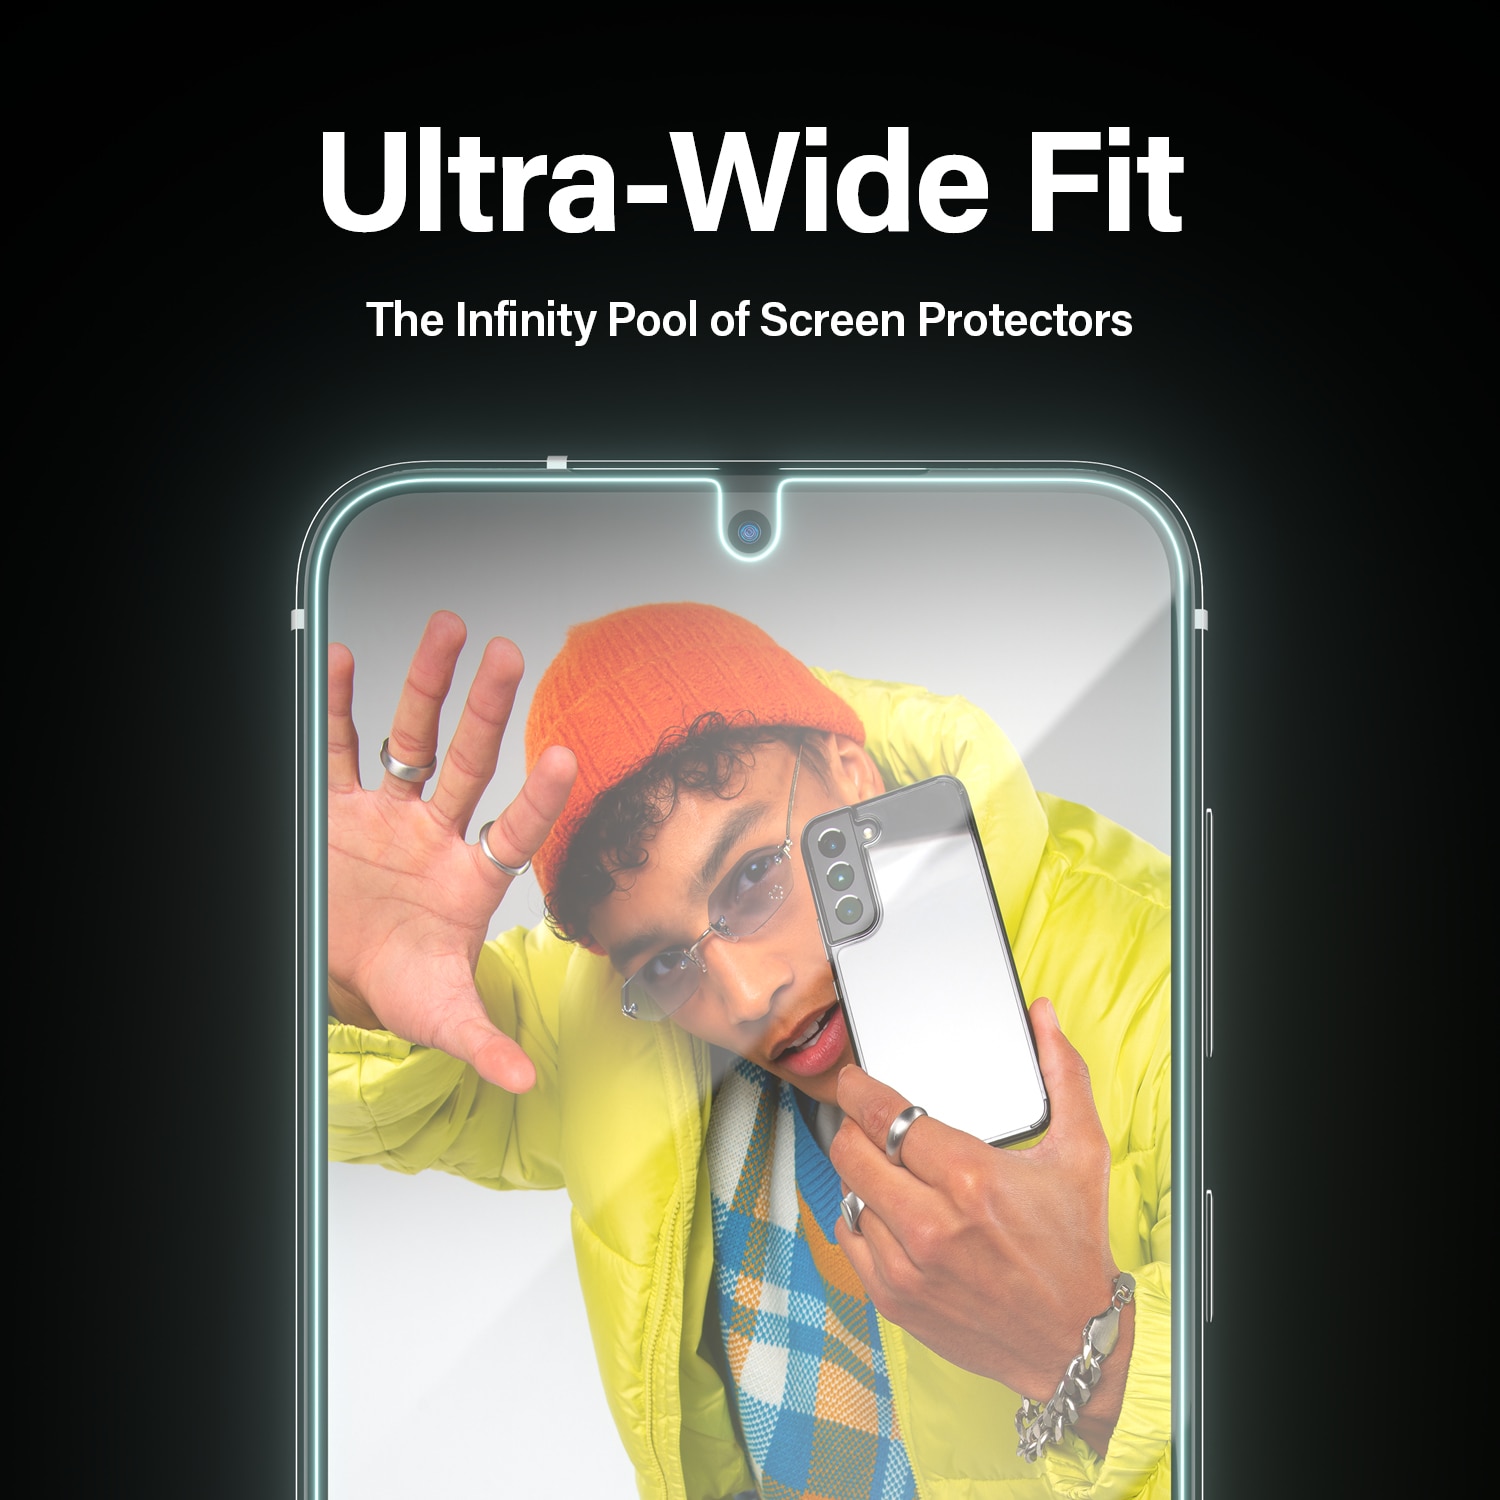 Samsung Galaxy S23 Screen Protector (with EasyAligner) Ultra Wide Fit